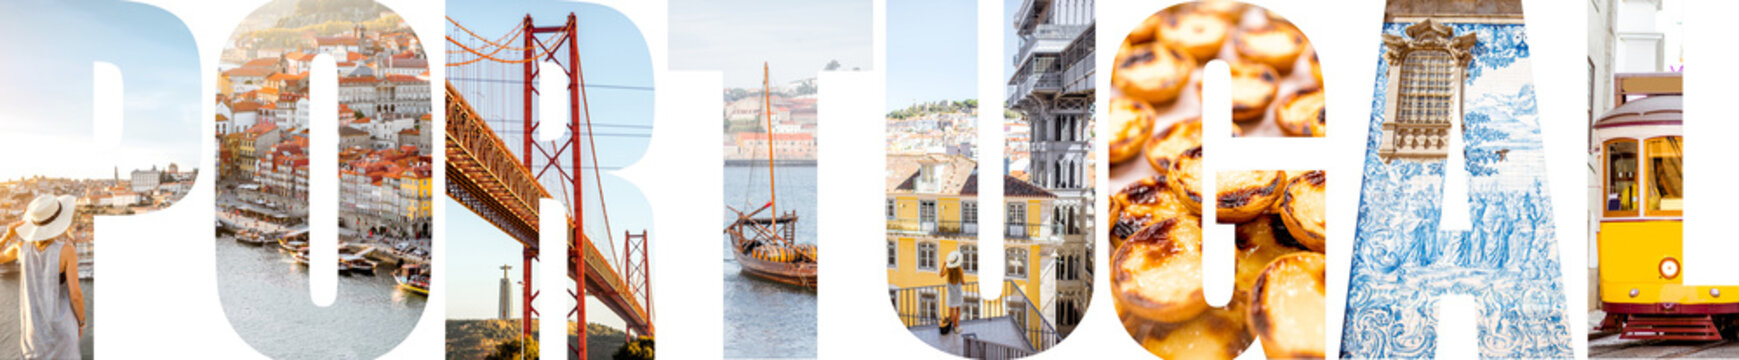 Portugal letters filled with pictures of famous places and landmarks in Portugal